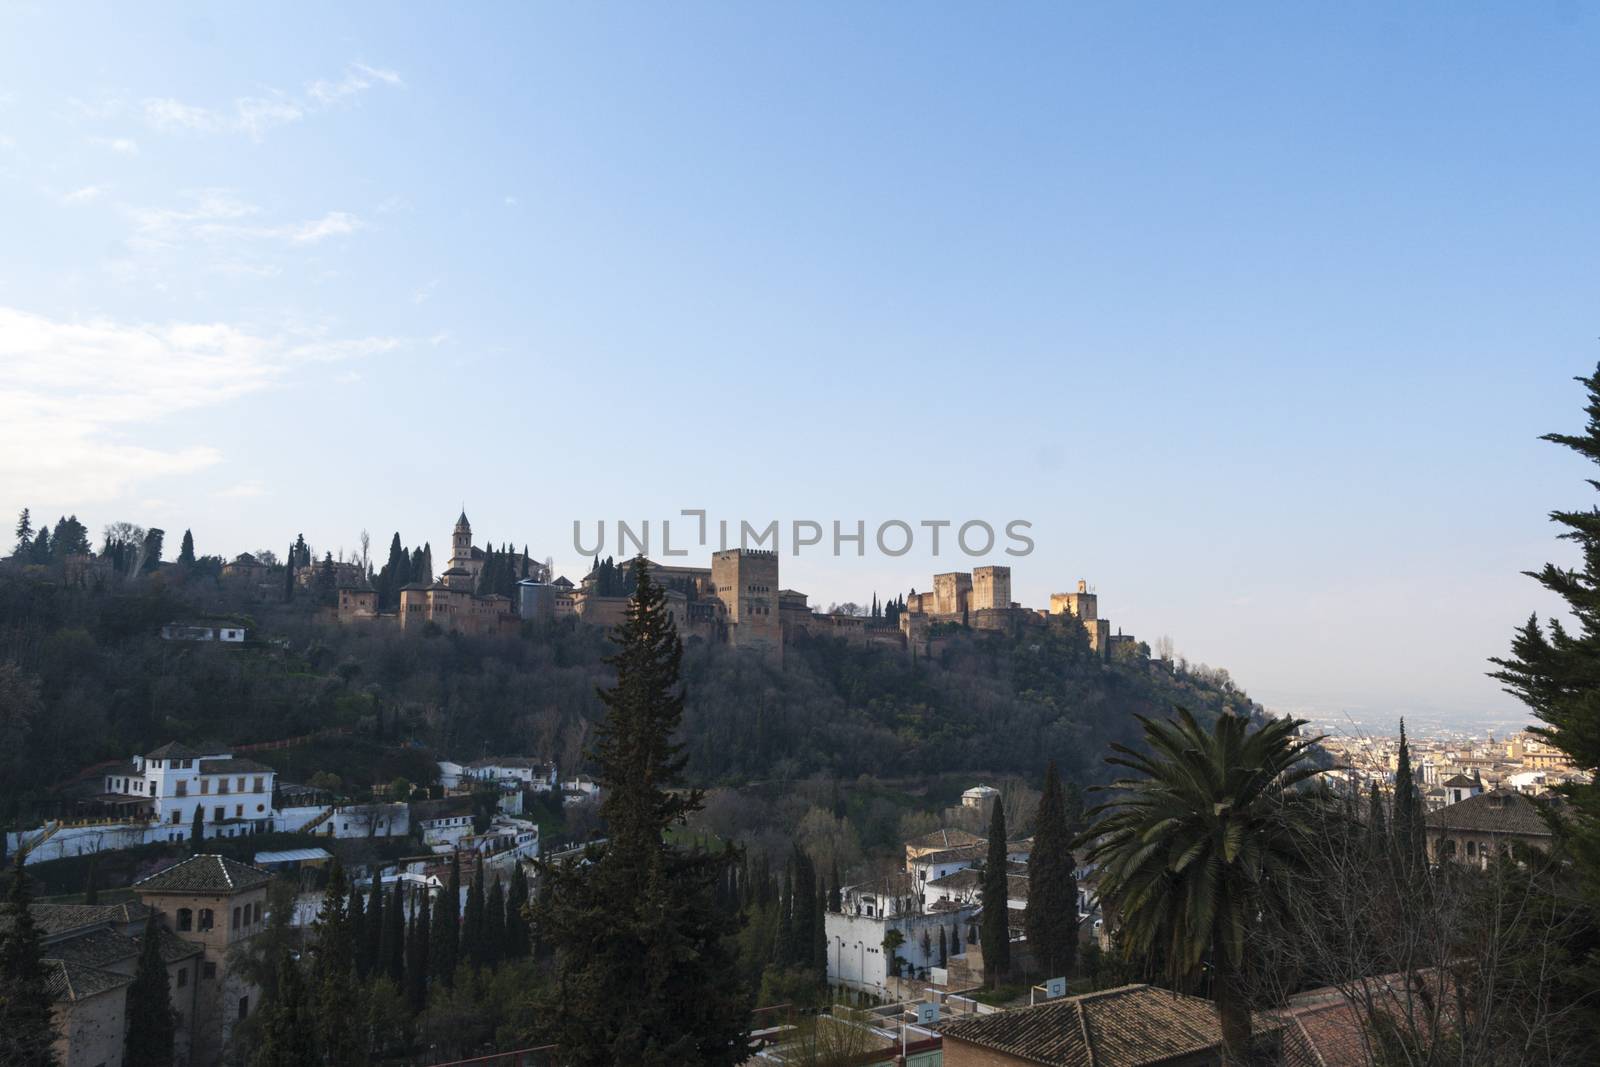 View of the famous Alhambra in Granada, Spain. Islamic architecture